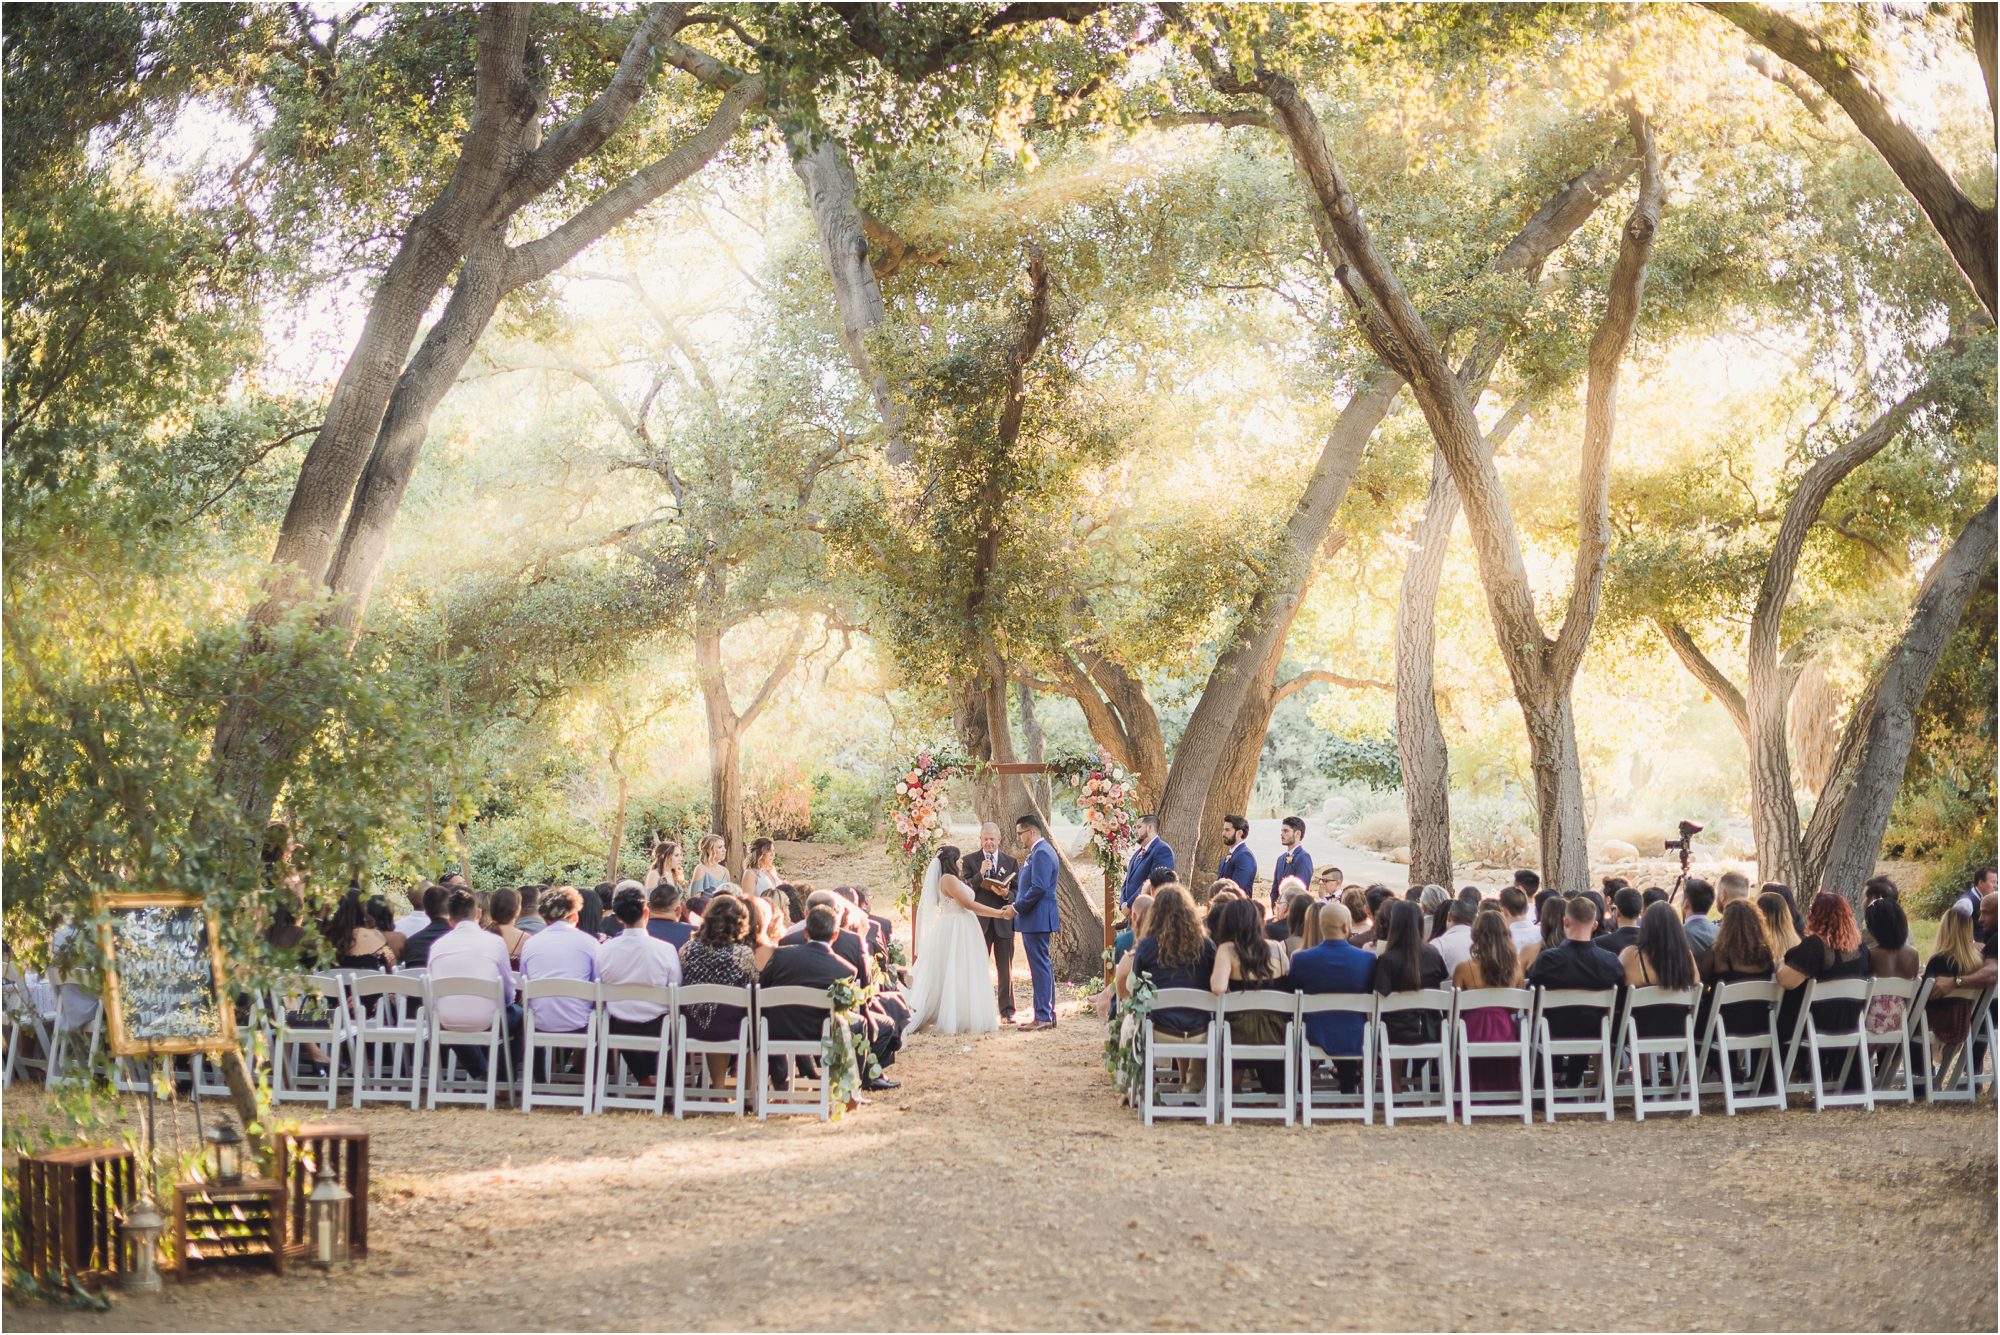 Michael and Stephanie face each other at the end of the aisle, surrounded by an oak forest at their Fairytale Forest Wedding in Pasadena